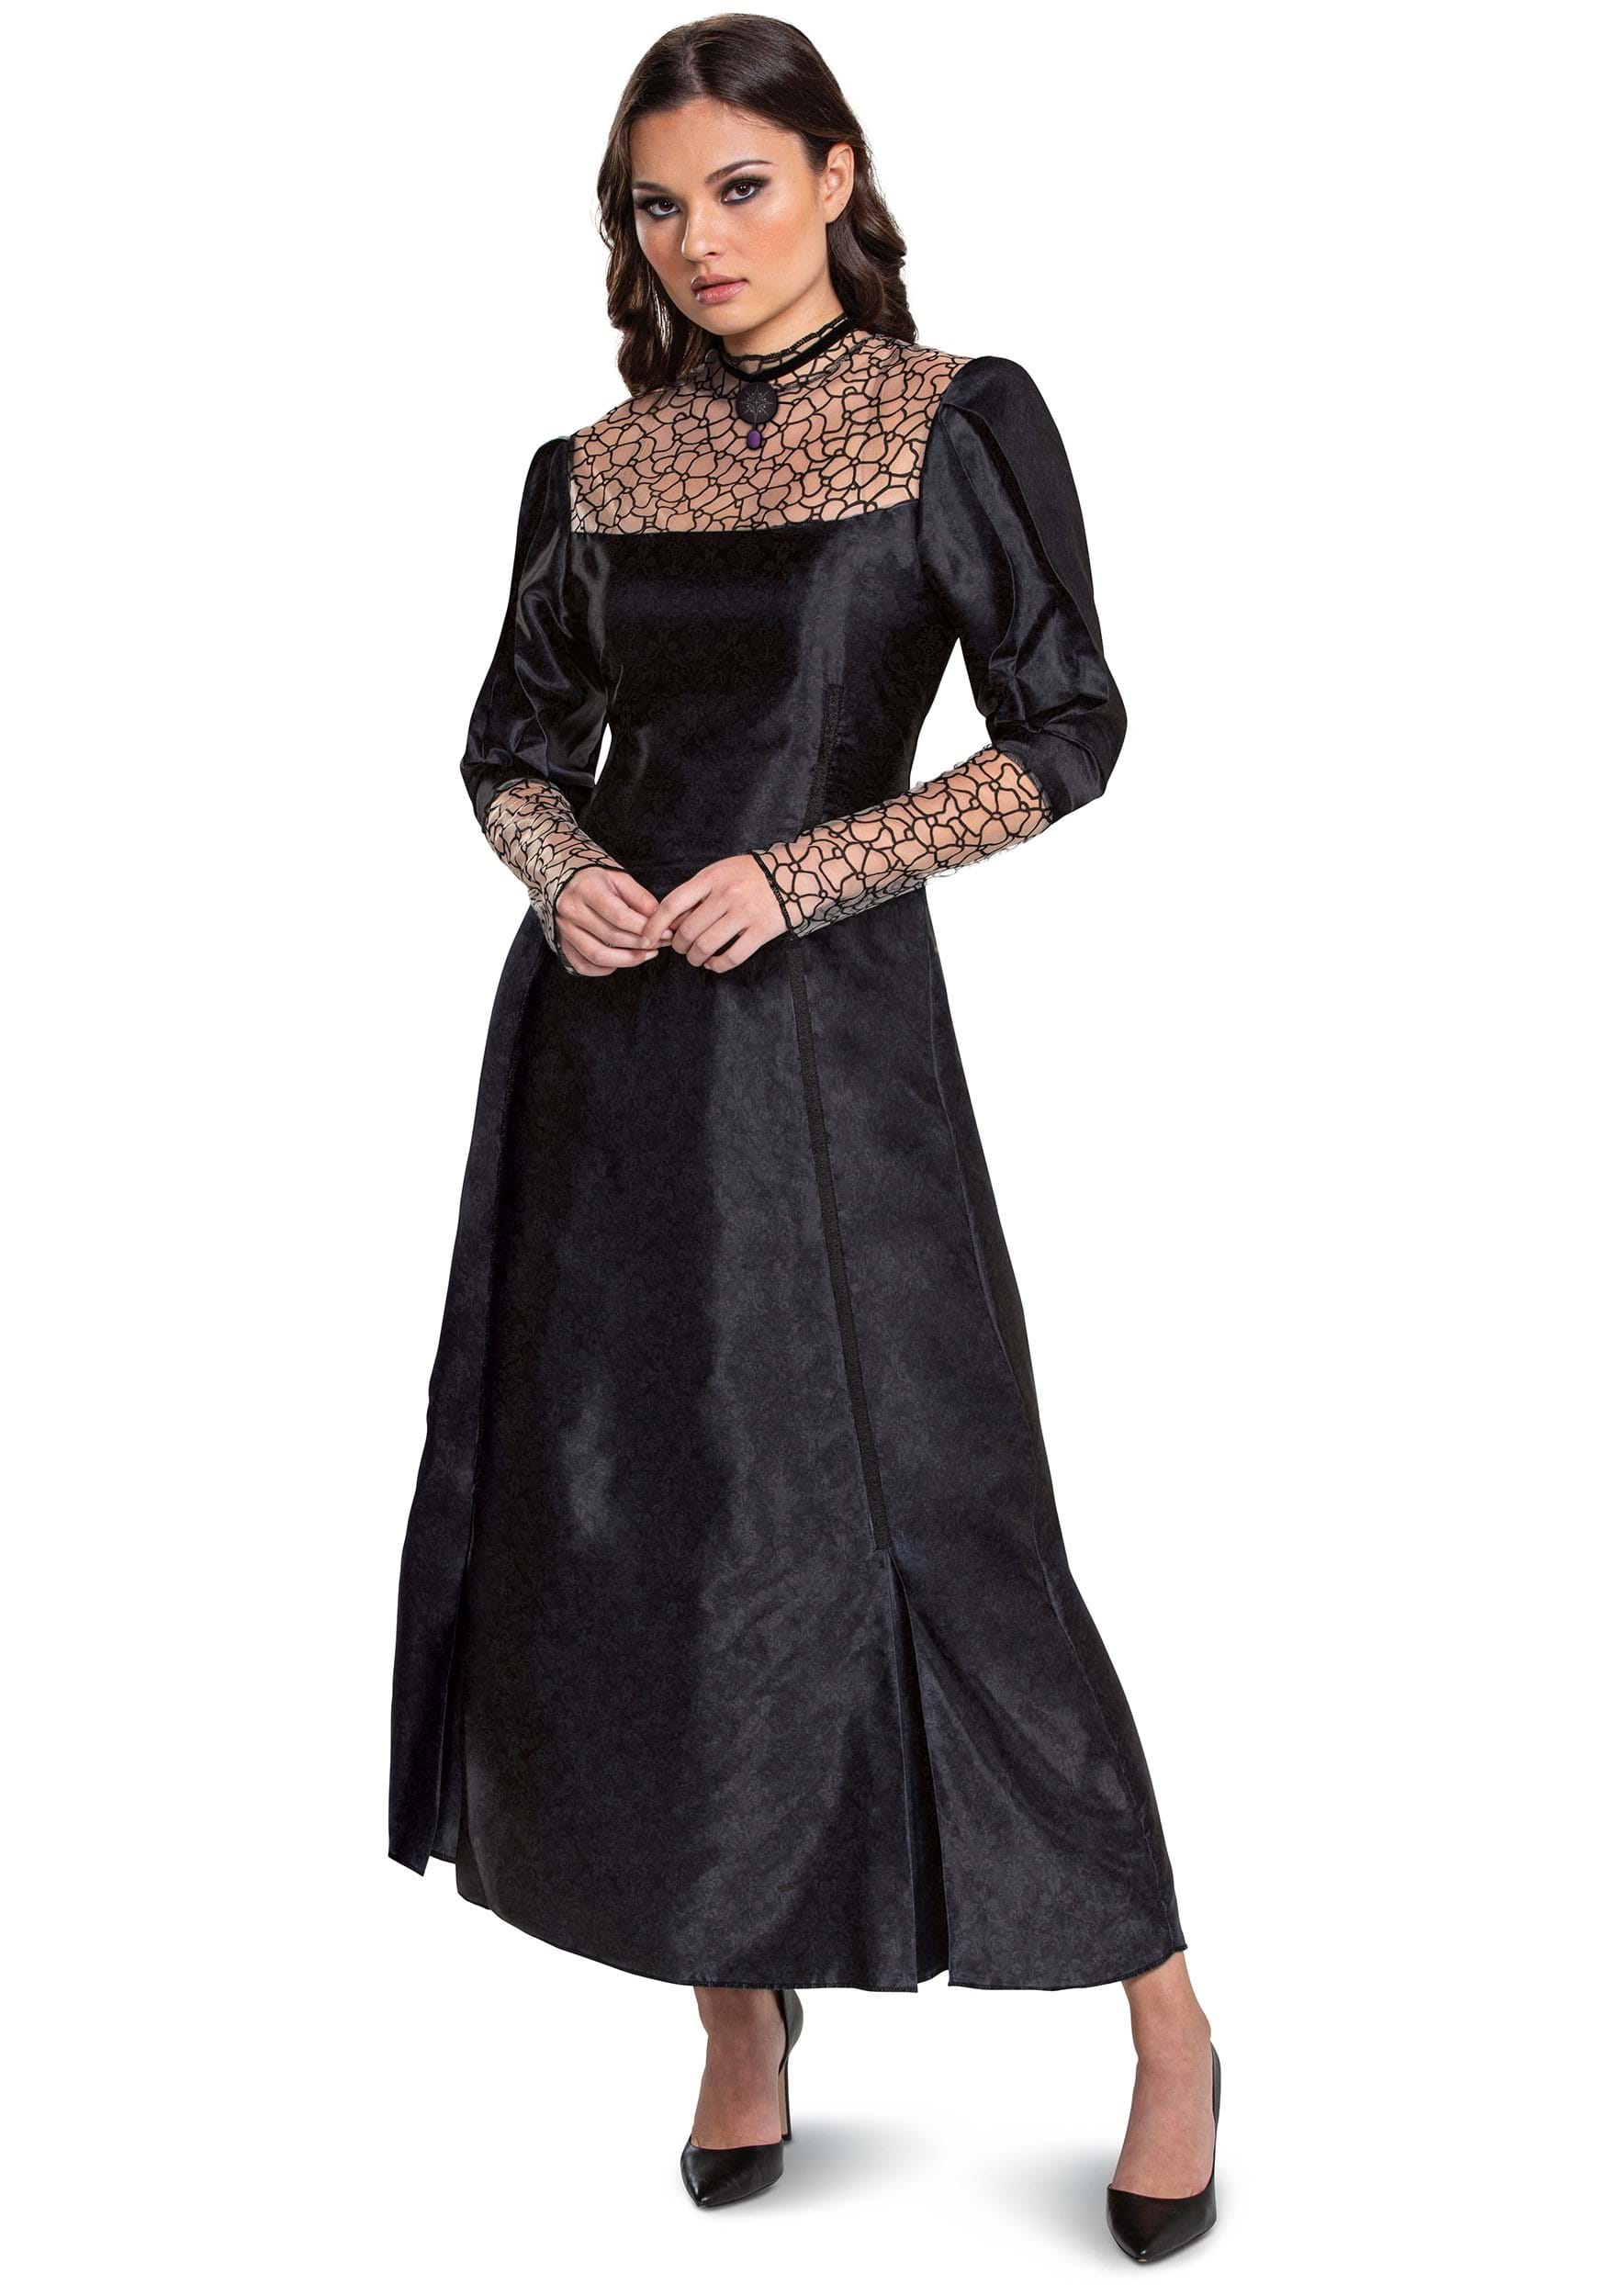 Women's The Witcher Classic Yennefer Fancy Dress Costume